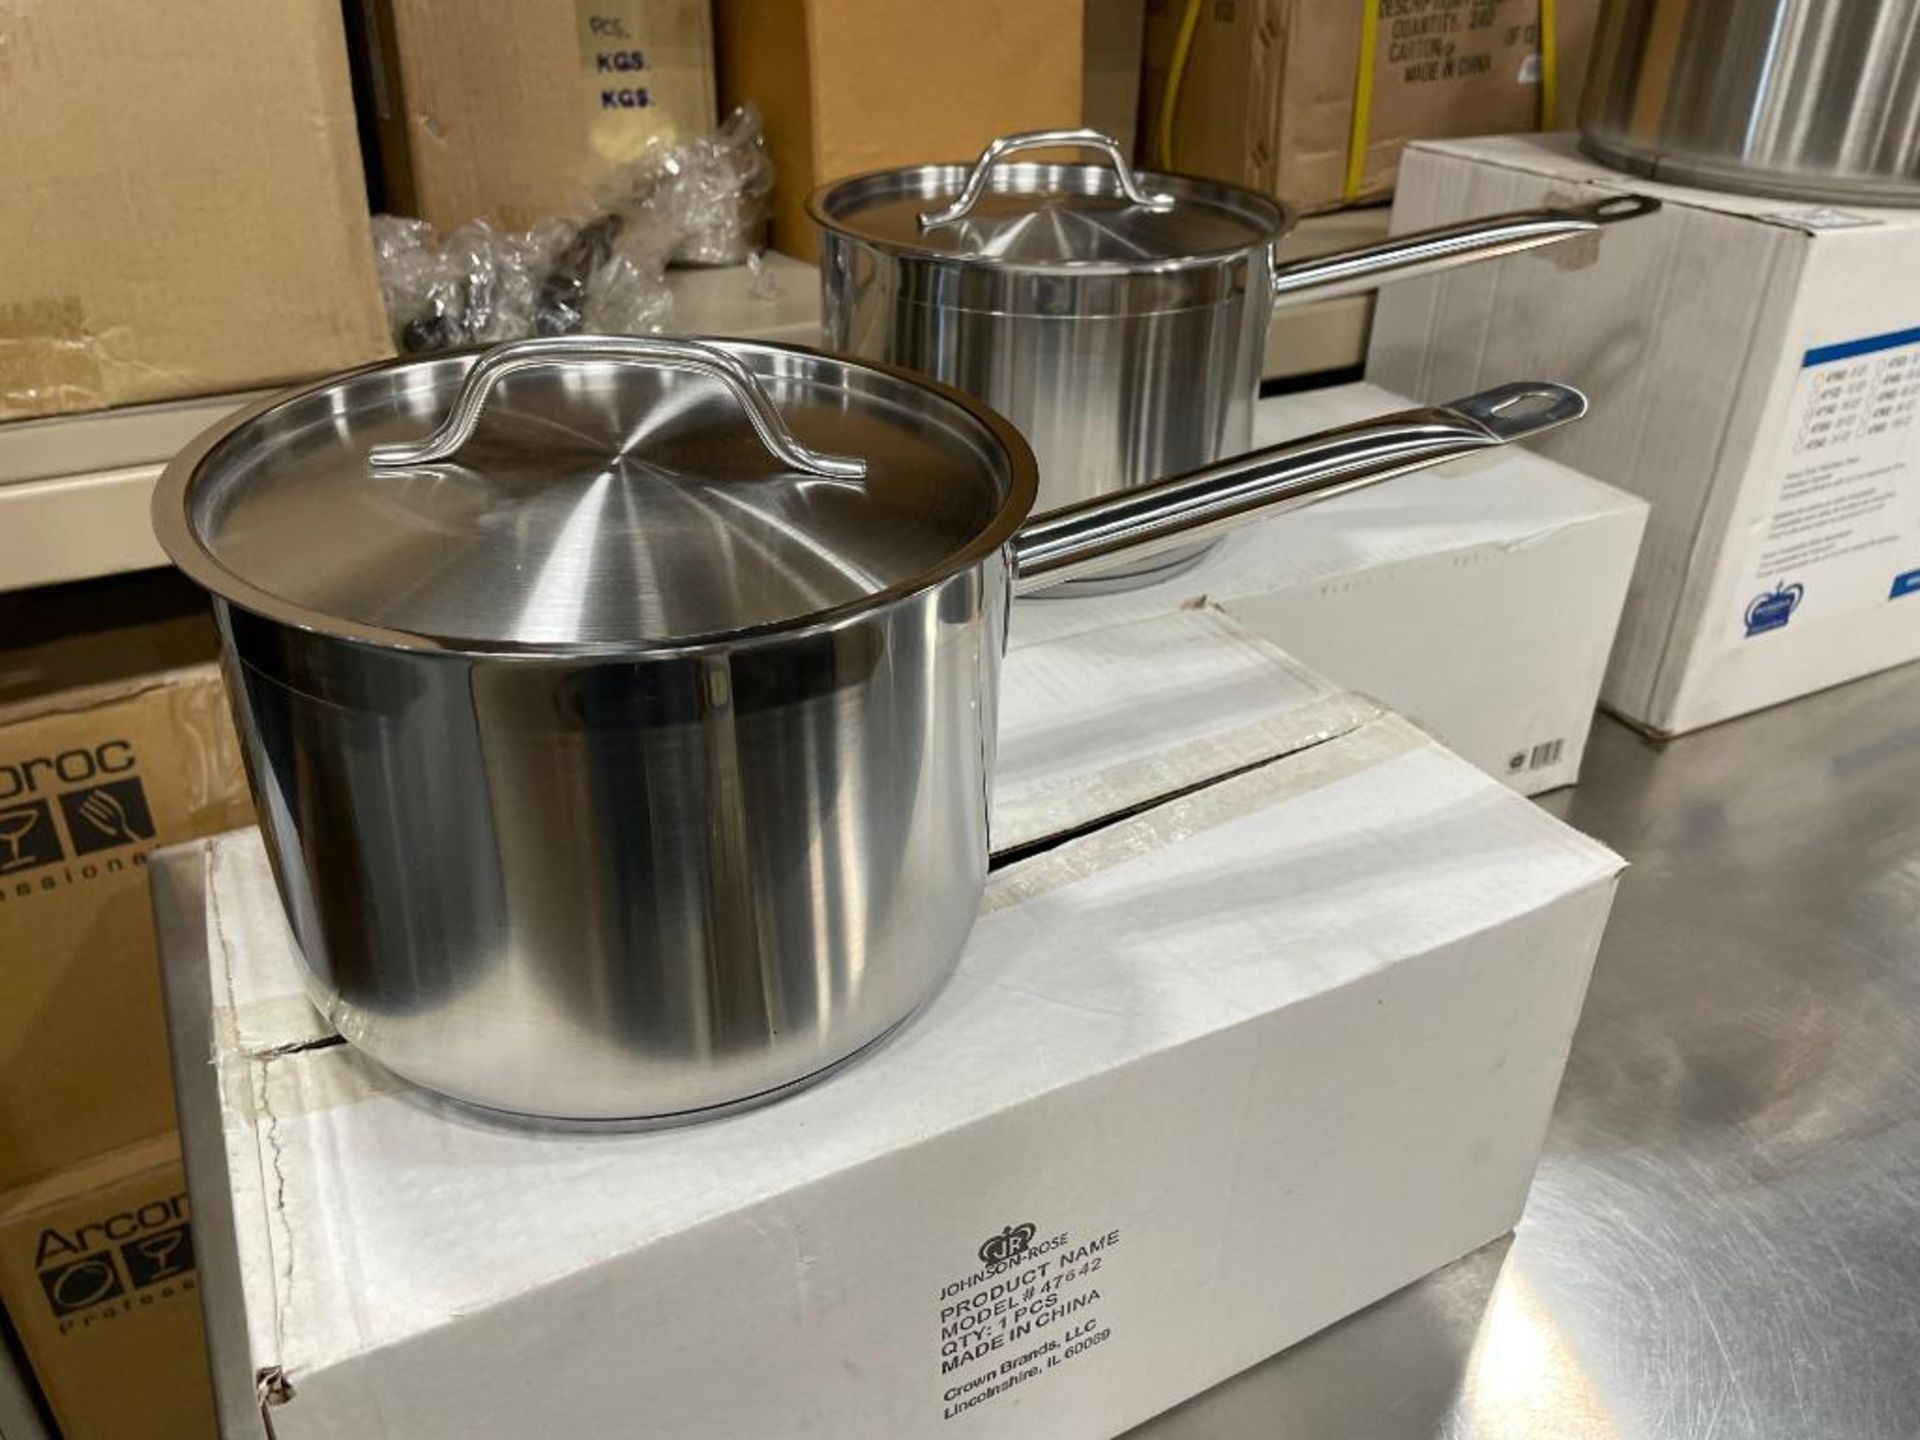 (2) 4.5QT HEAVY DUTY STAINLESS SAUCE PAN SET INDUCTION CAPABLE, JR 47642 - NEW